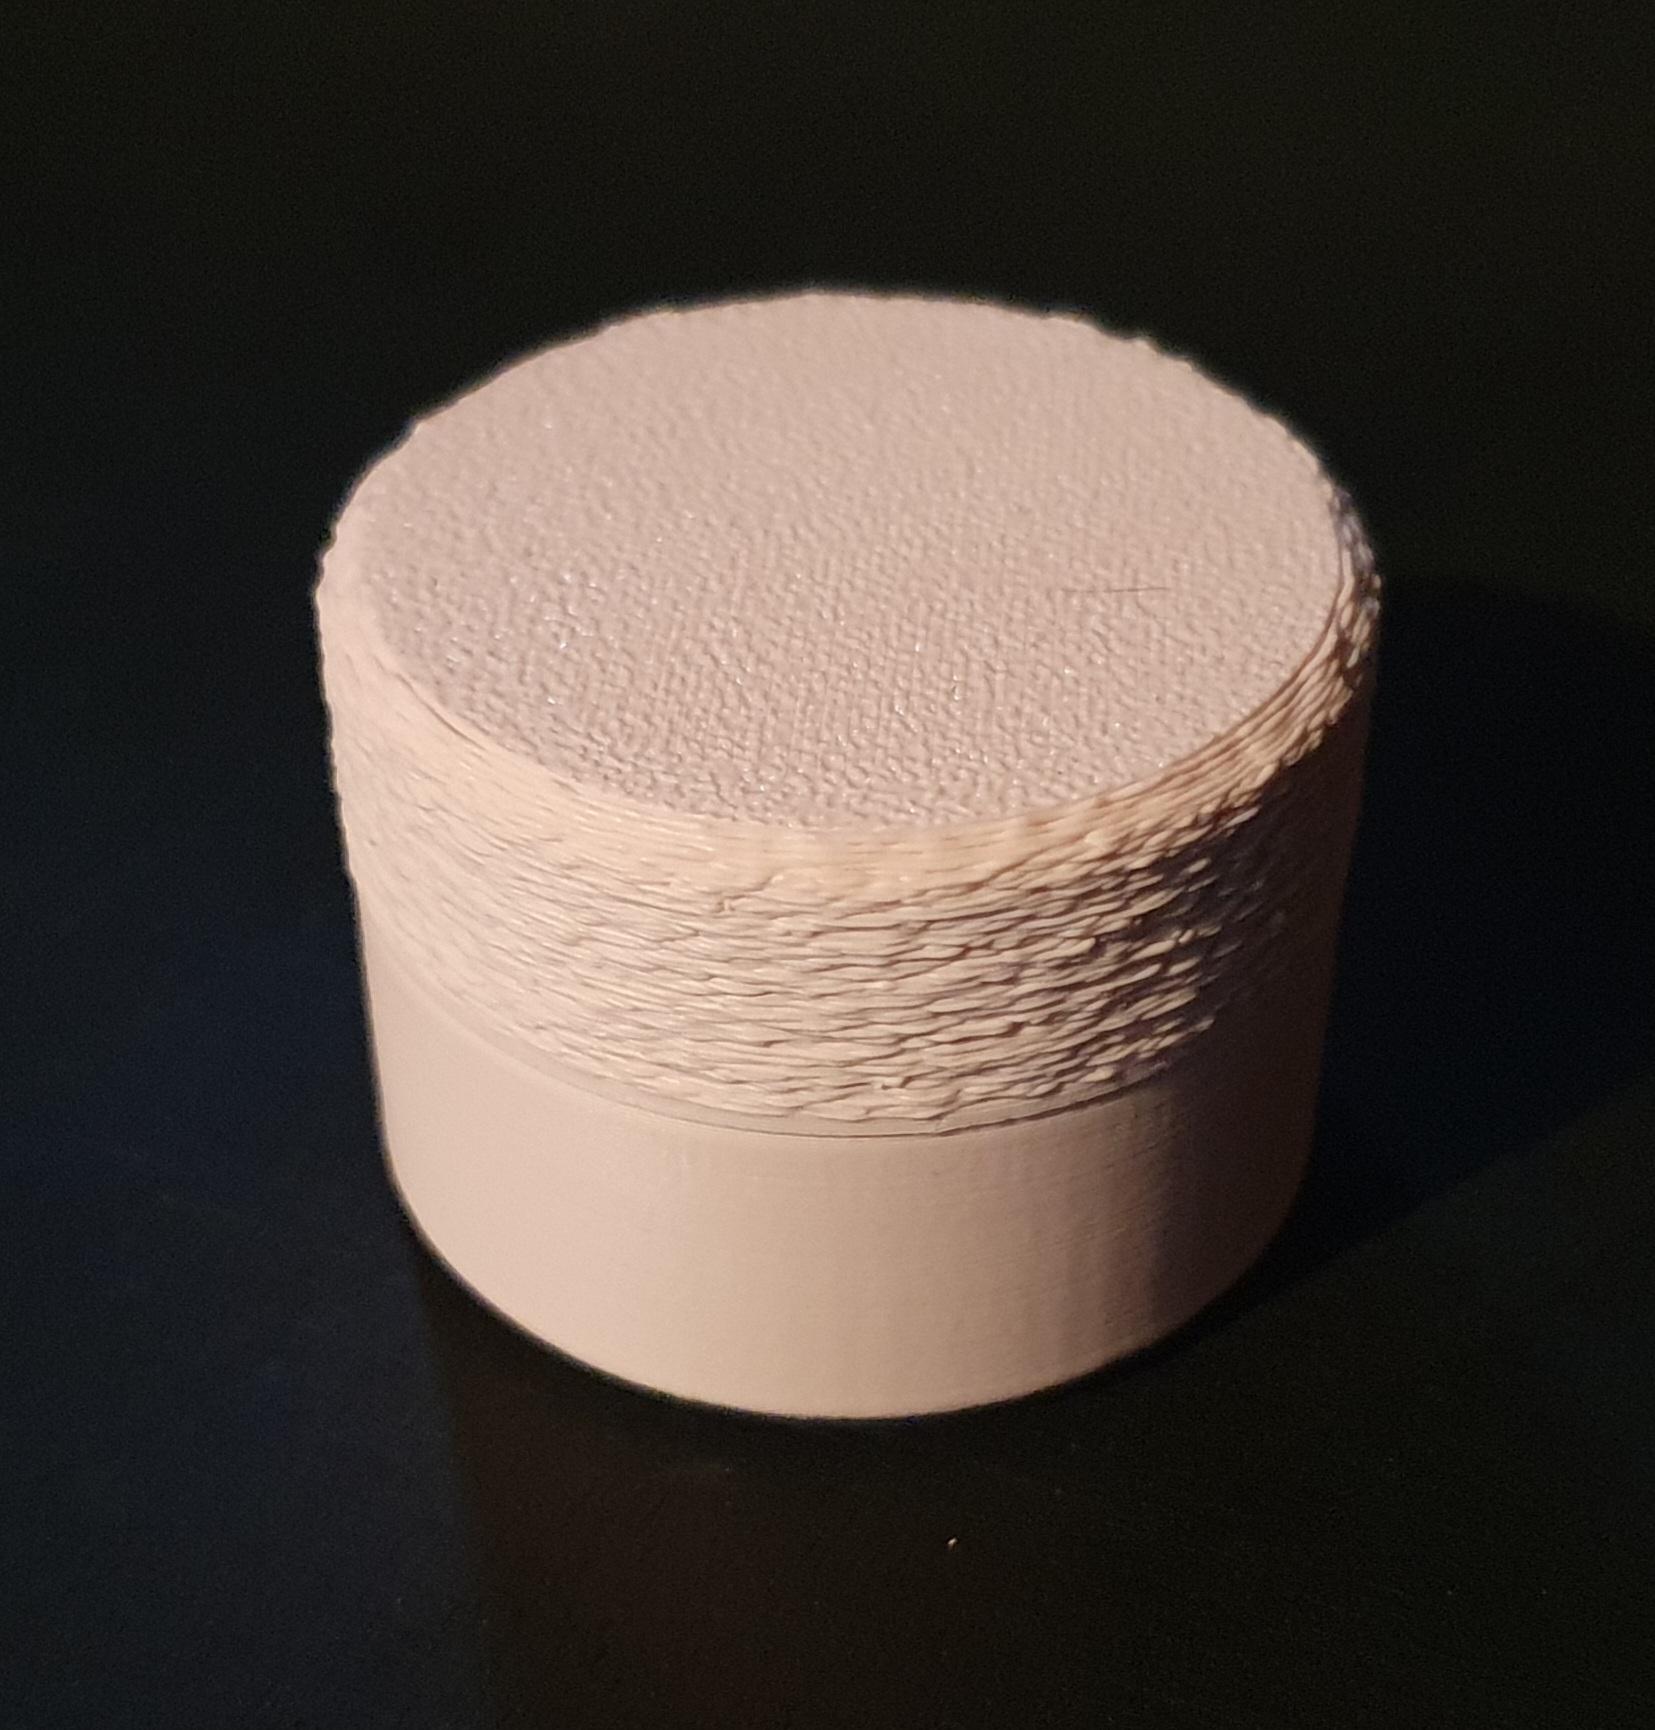 parametric can with threaded lid 3d model